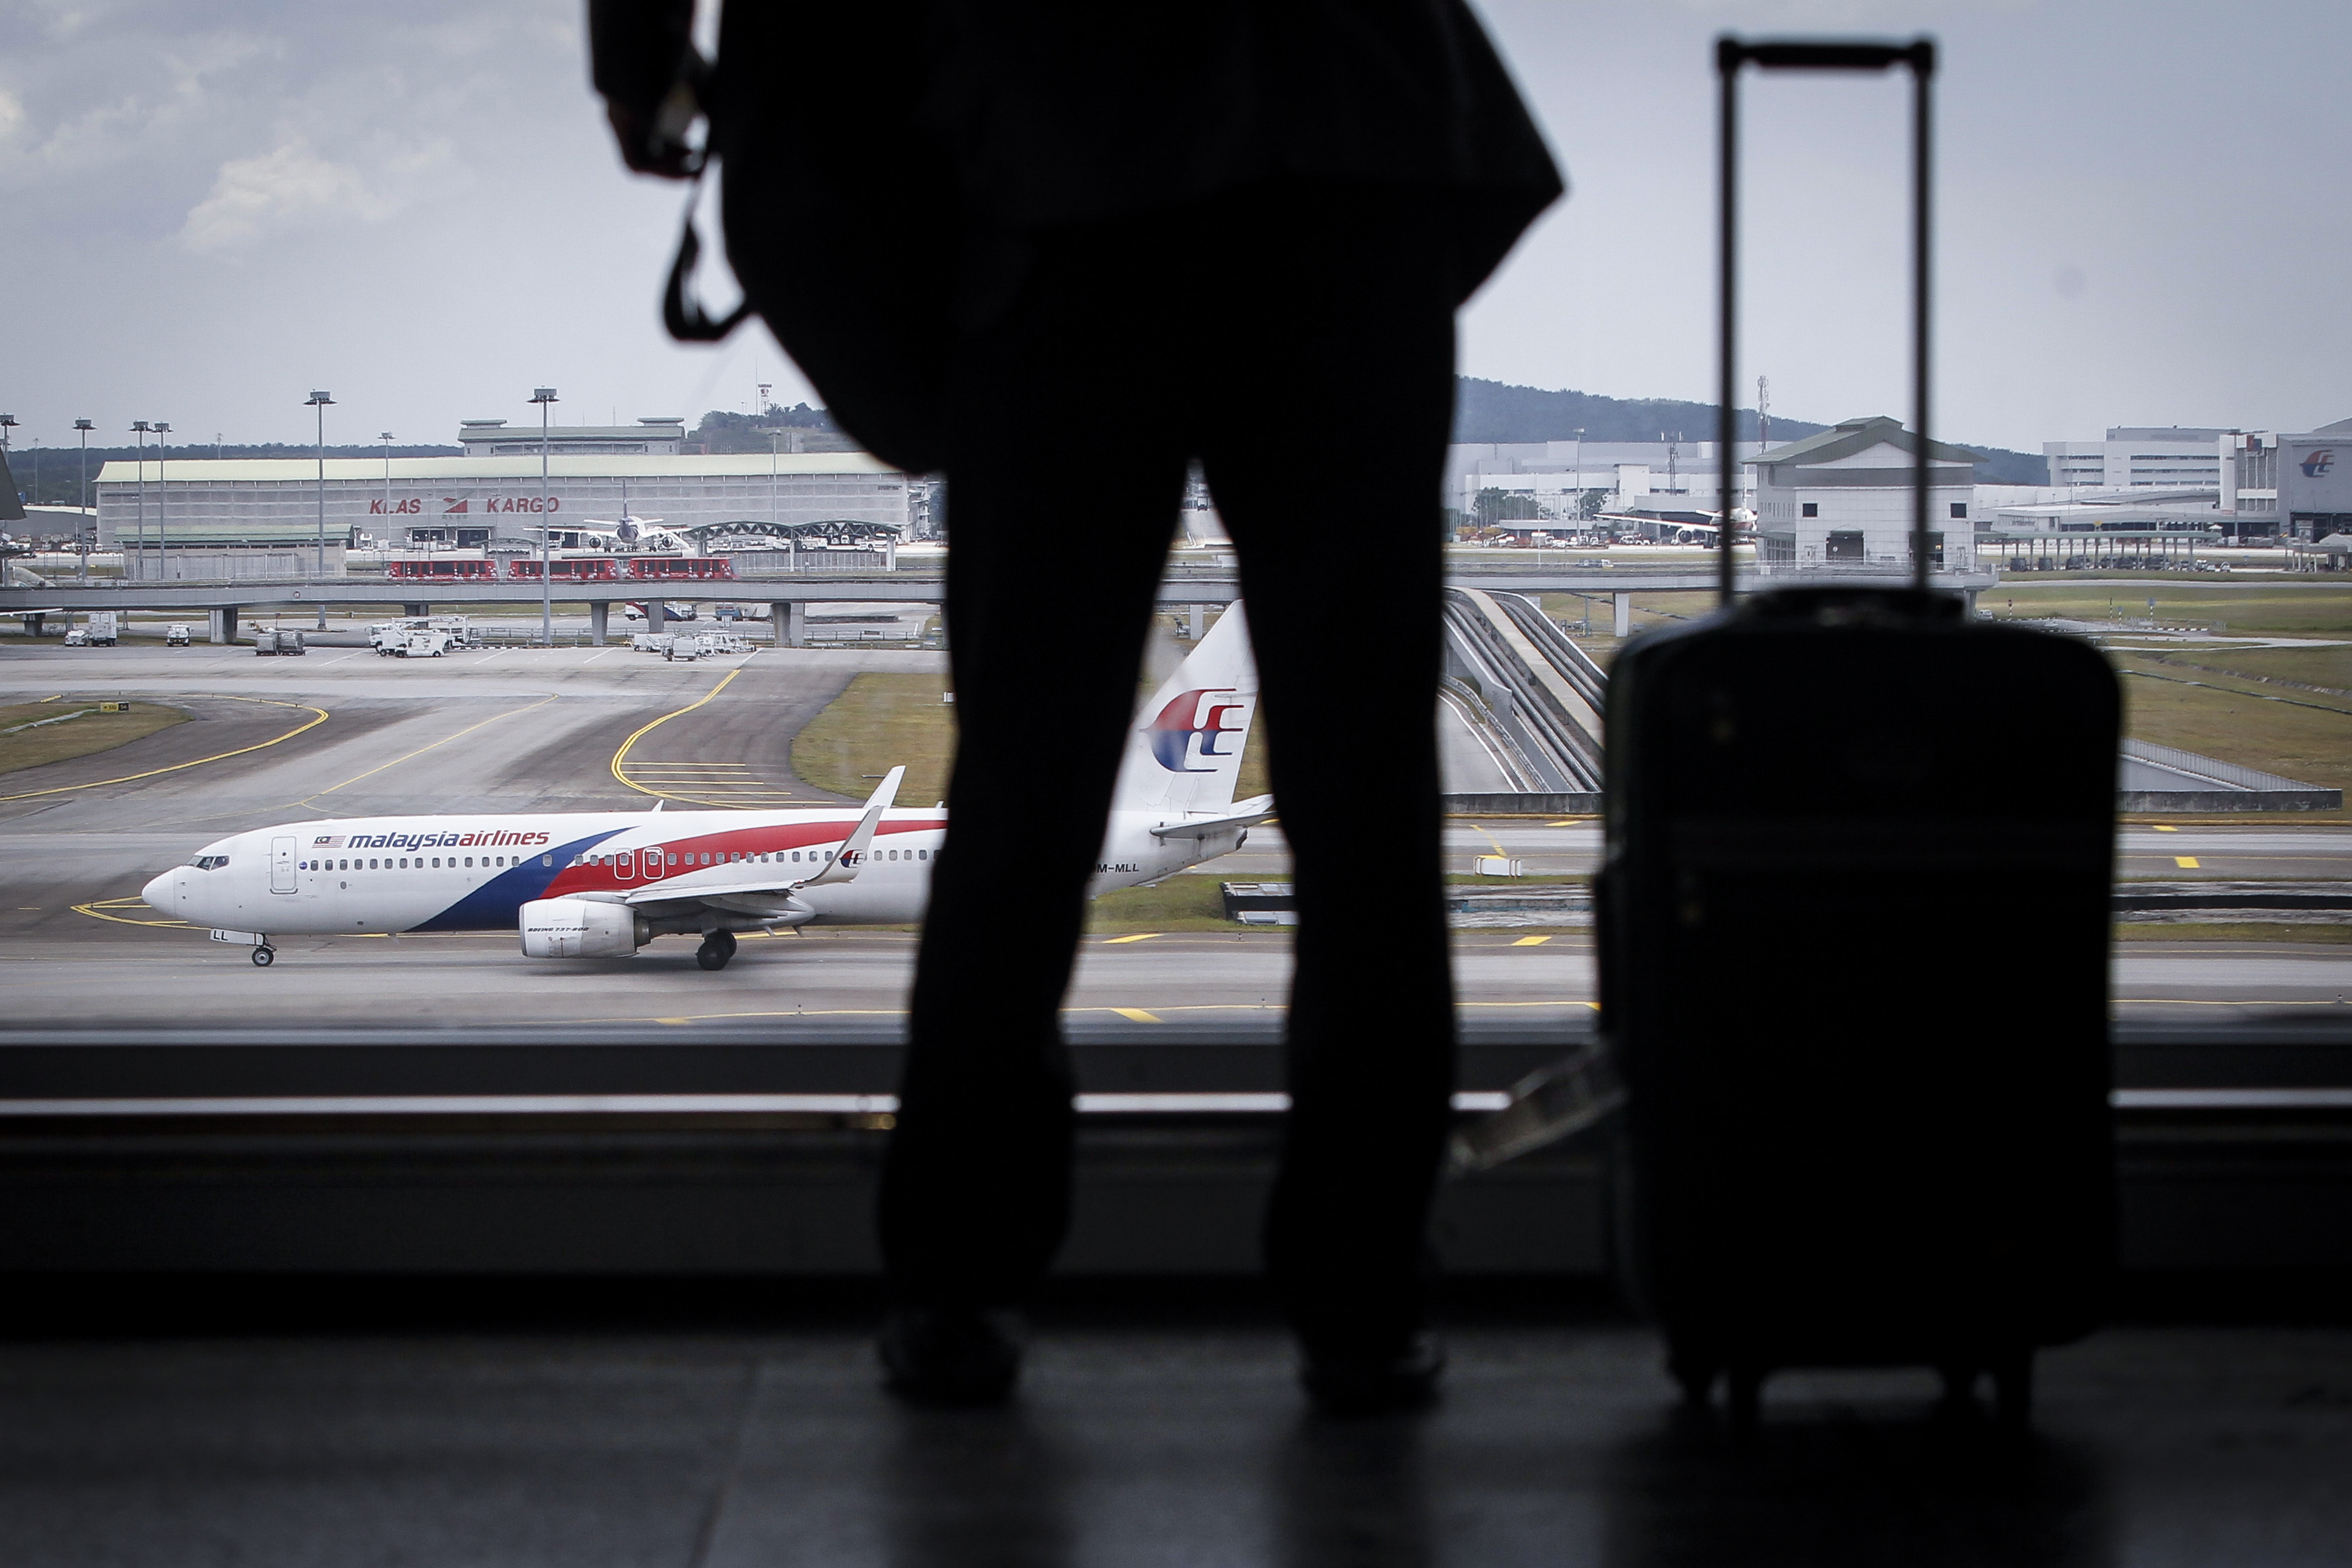 A traveller is silhouetted against a Malaysia Airlines plane at the Kuala Lumpur International Airport in Sepang, Malaysia, Tuesday, March 8, 2016. (Joshua Paul—AP)